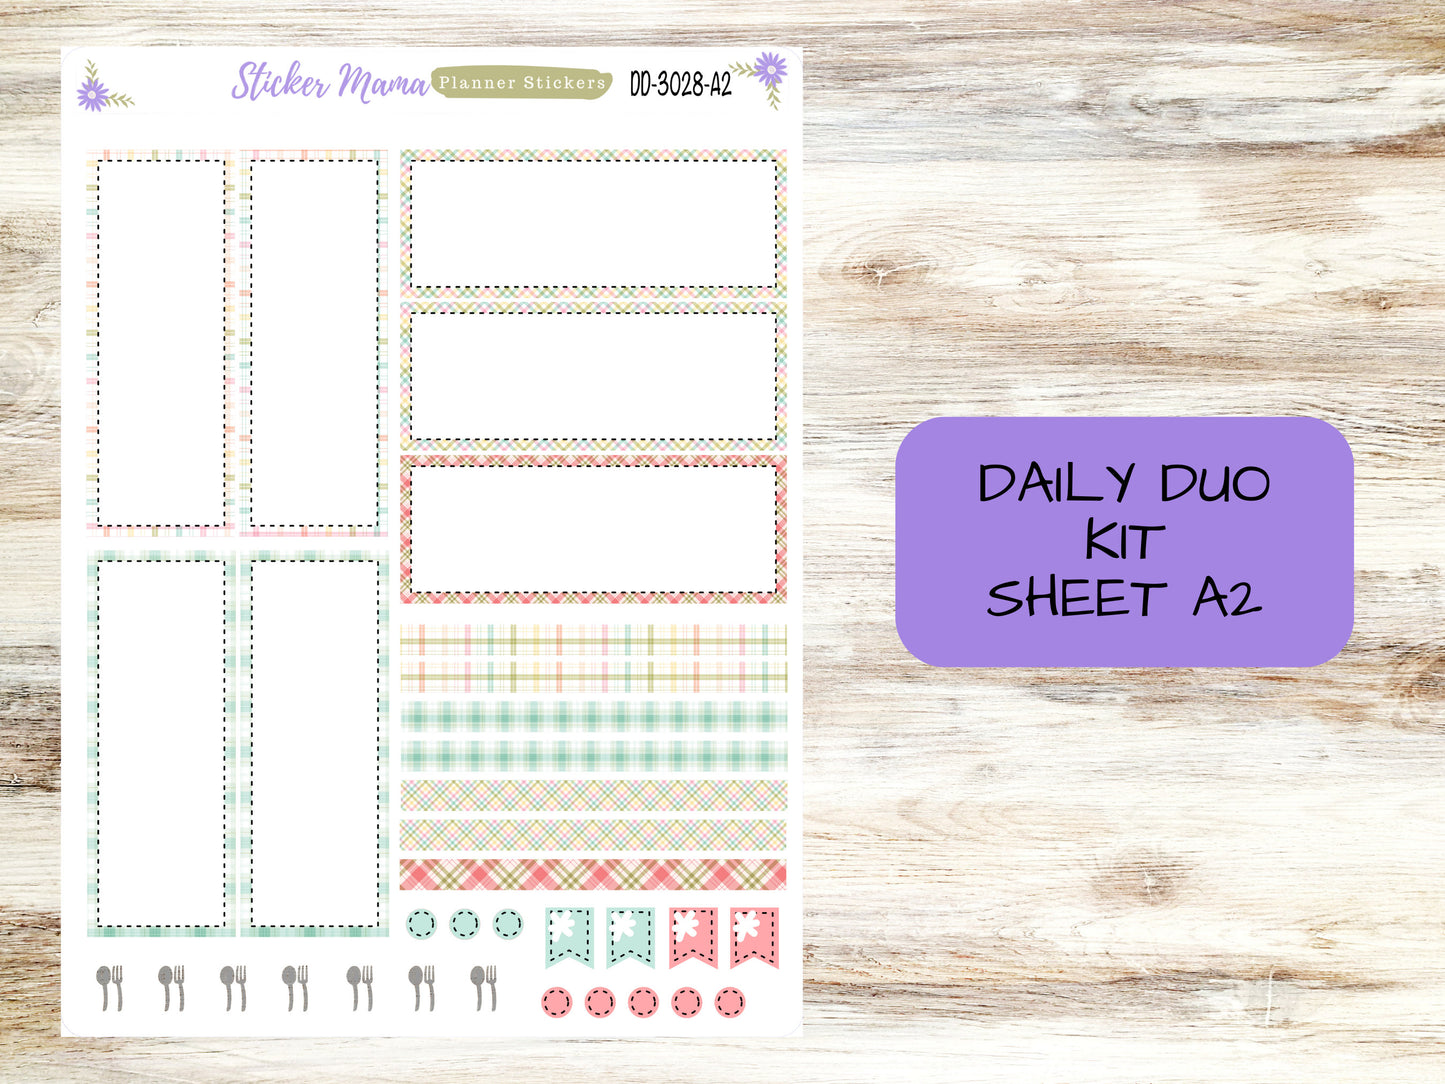 DAILY DUO 7x9-Kit #3028  || Easter Spring Plaid  || Planner Stickers - Daily Duo 7x9 Planner - Daily Duo Stickers - Daily Planner